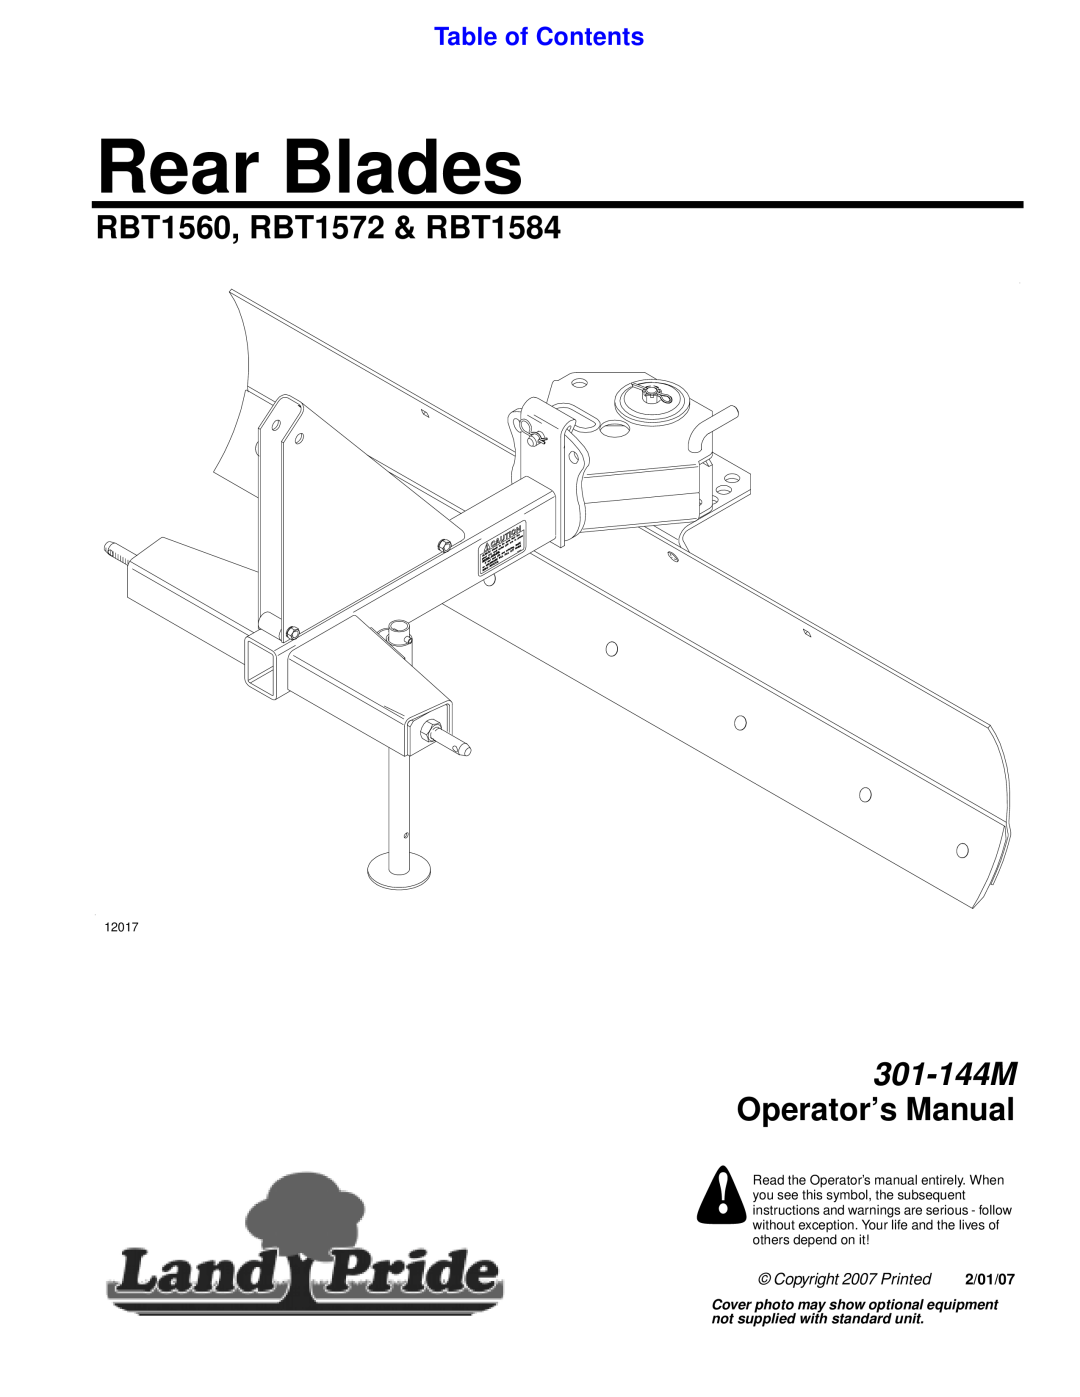 Land Pride manual RBT1560, RBT1572 & RBT1584, Table of Contents, Rear Blades, 301-144M Operator’s Manual, 12017 